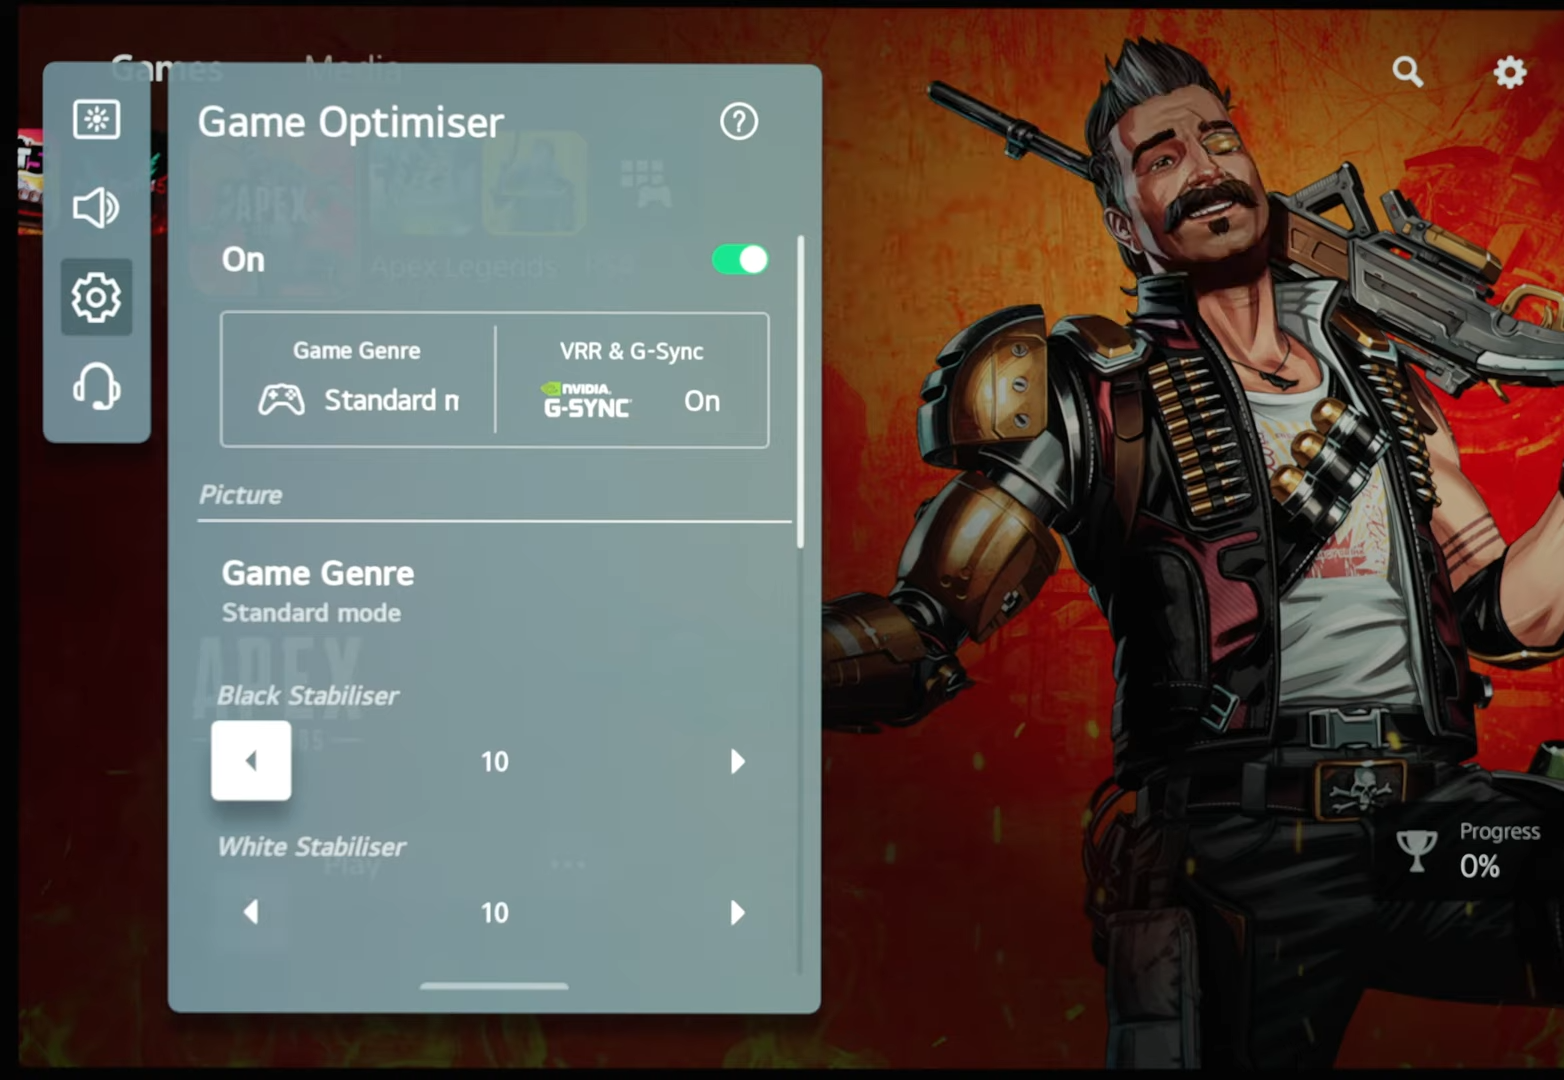 LG TV - How To Turn On Game Optimizer